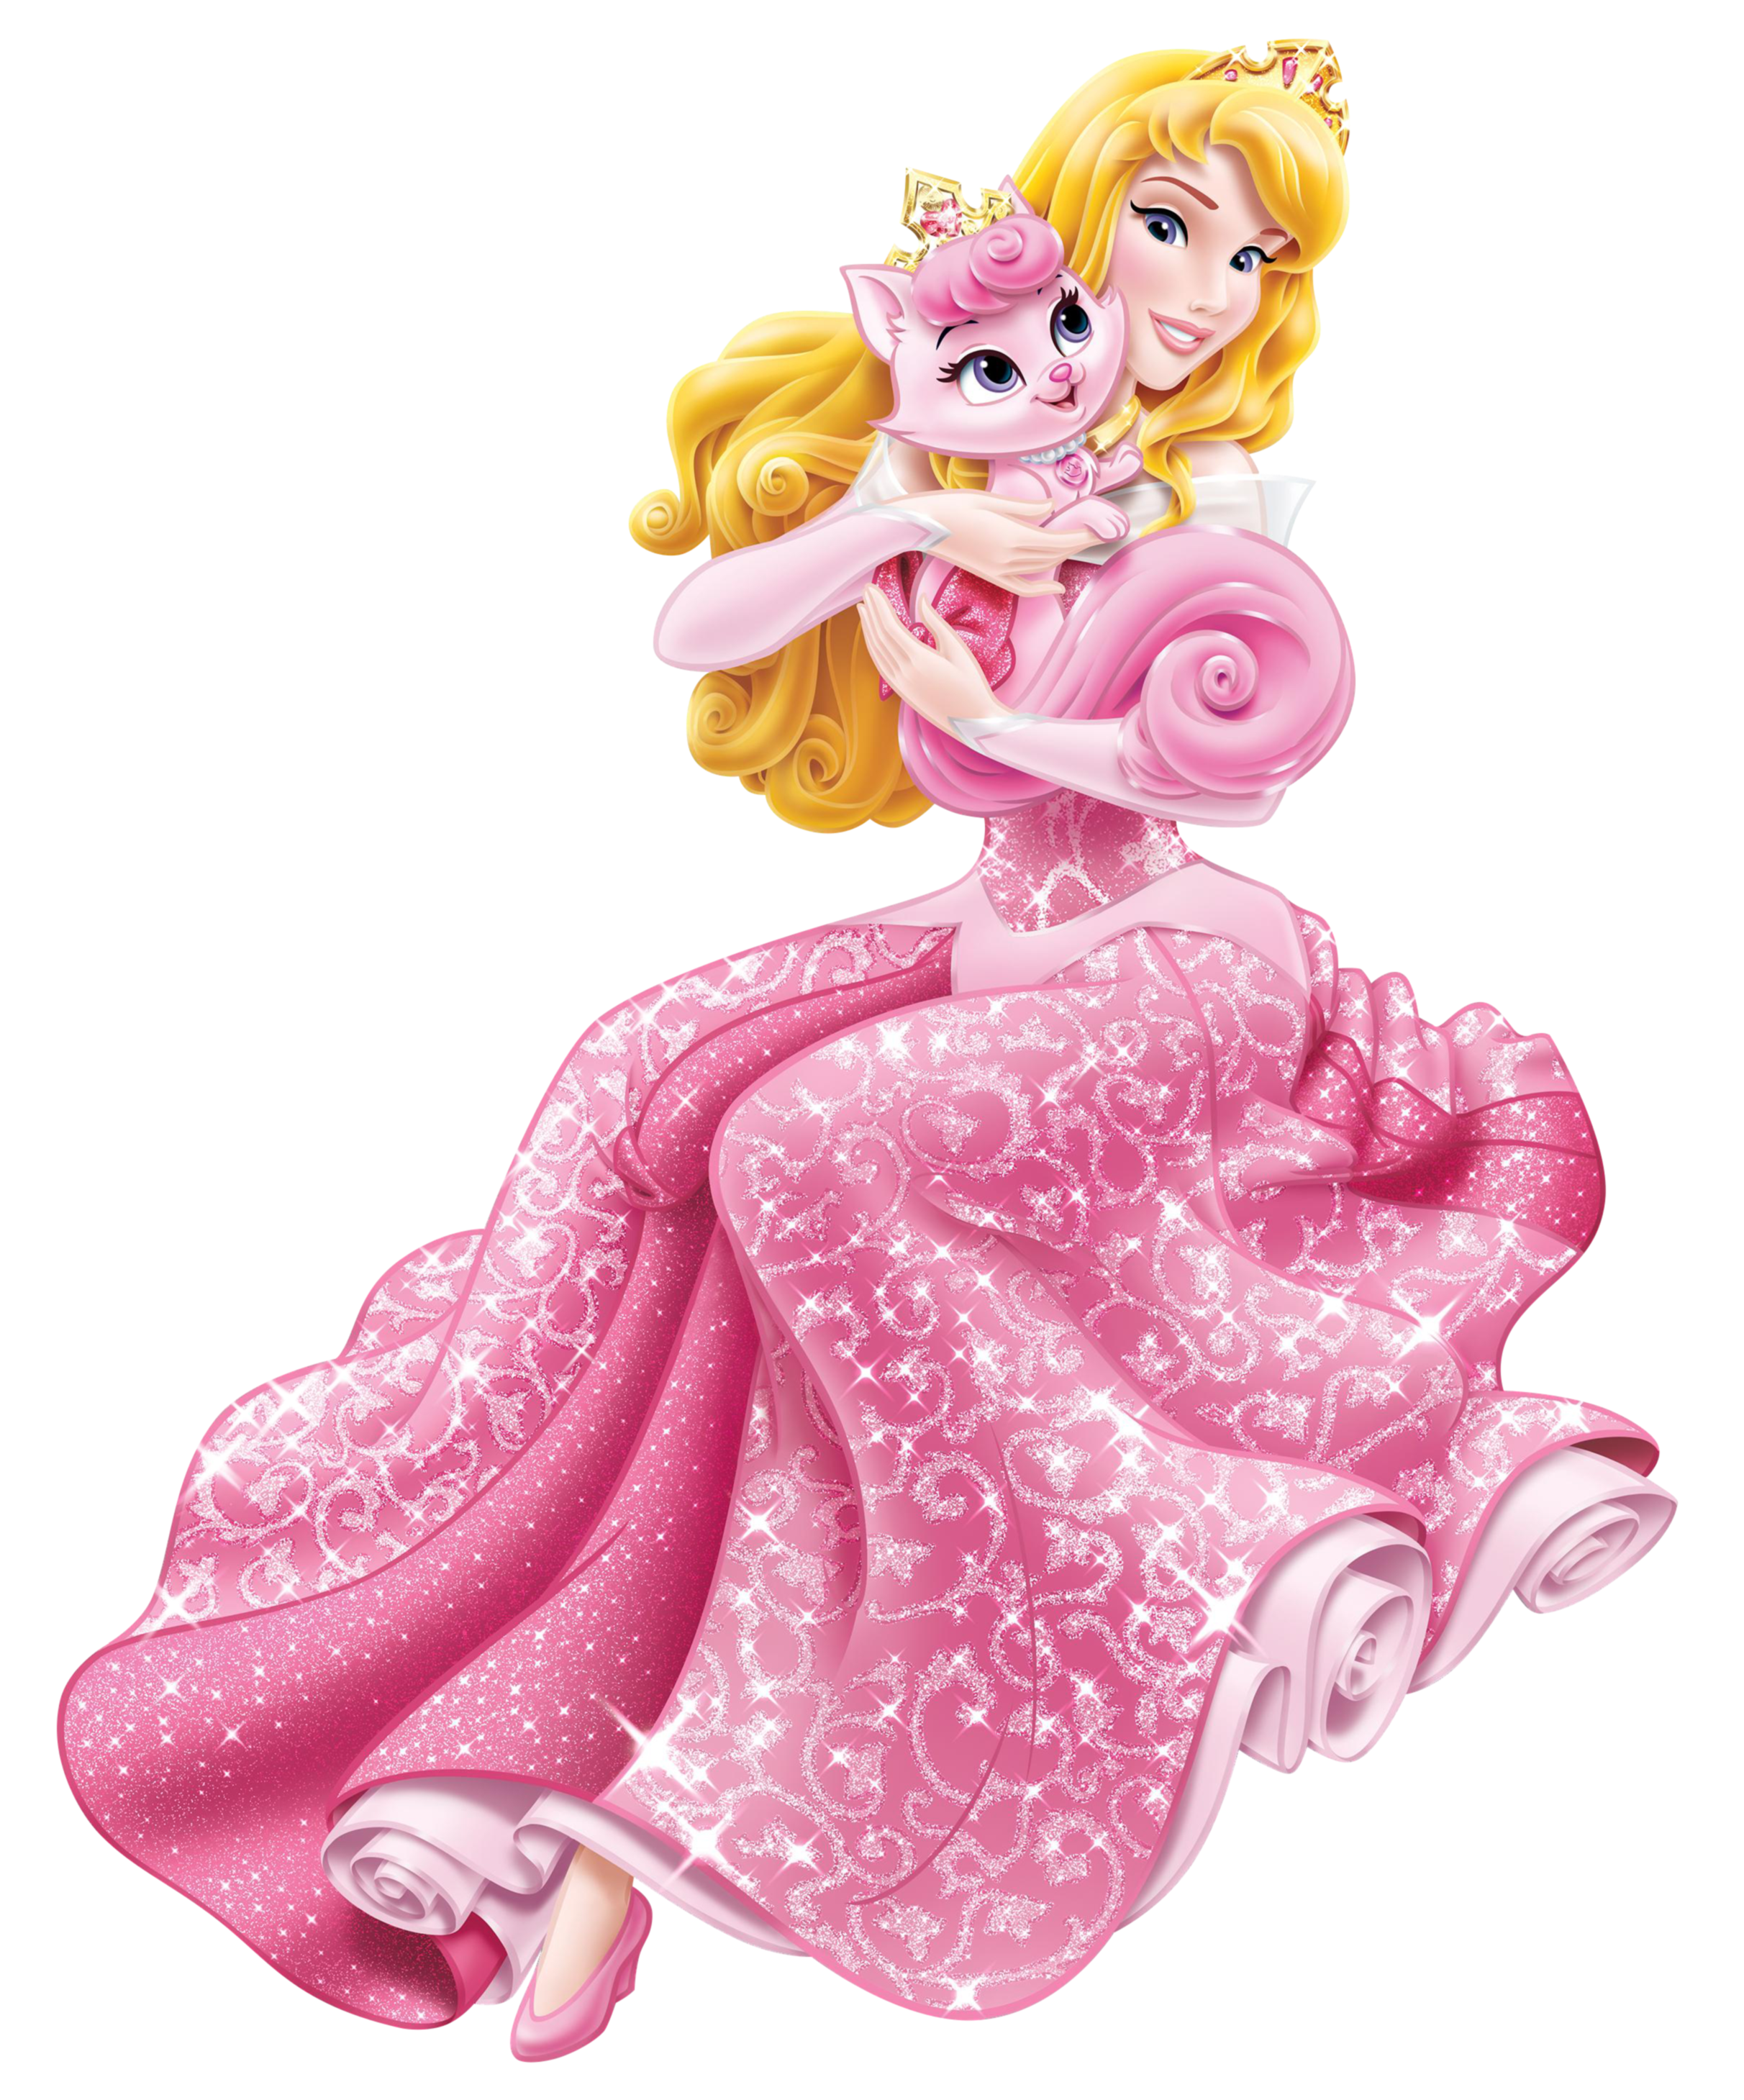 https://gallery.yopriceville.com/var/albums/Free-Clipart-Pictures/Cartoons-PNG/Disney_Princess_Aurora_with_Little_Kitten_Transparent_PNG_Clip_Art_Image.png?m=1449806102